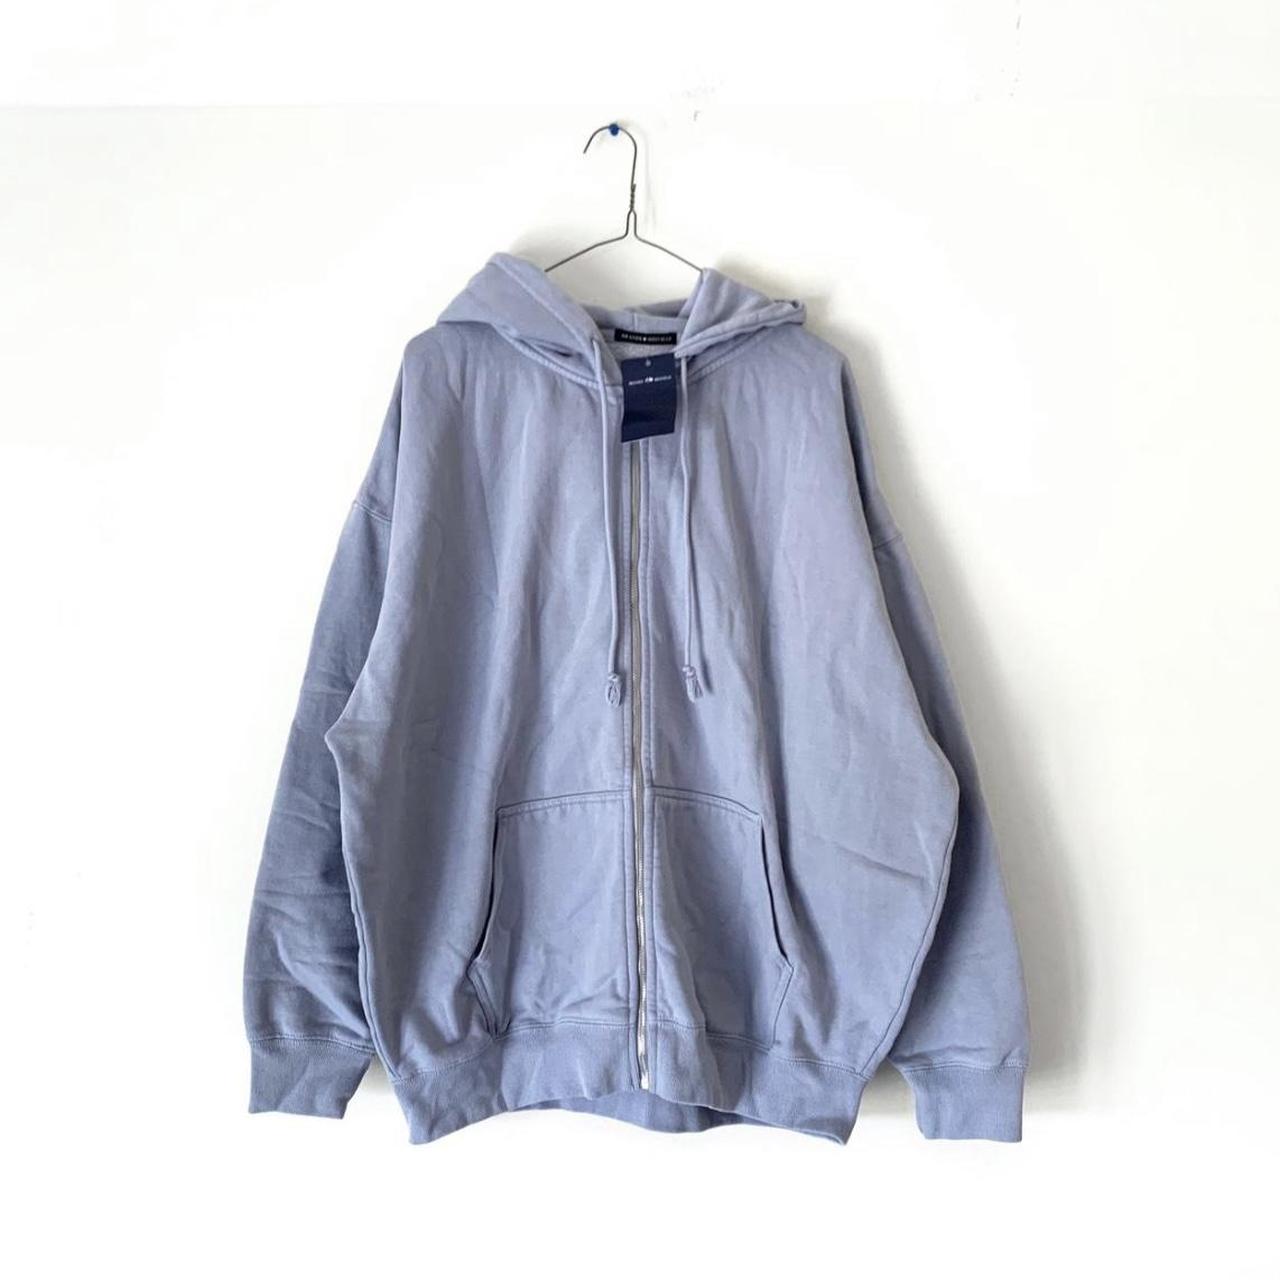 Brandy Melville Hoodie For Sale Canada - Womens Christy Light Grey